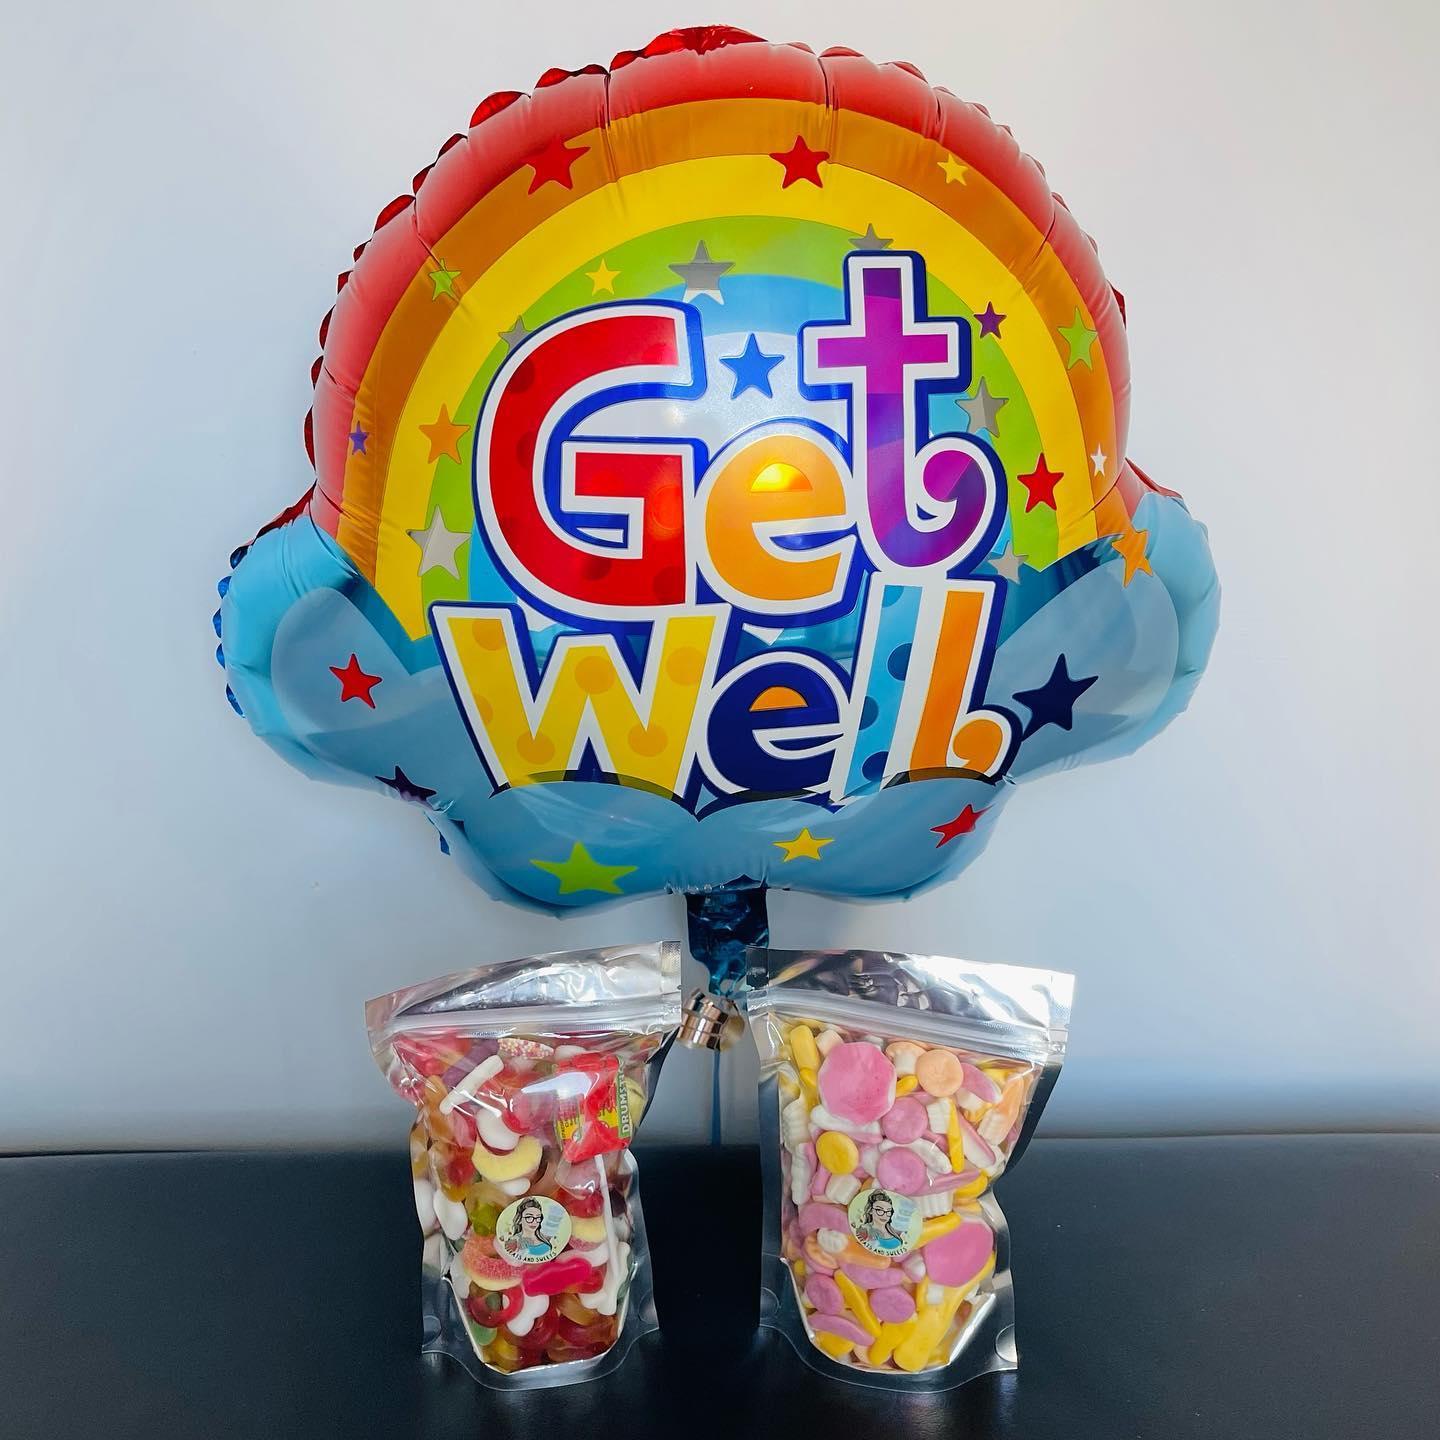 Get well - Treats & Sweets